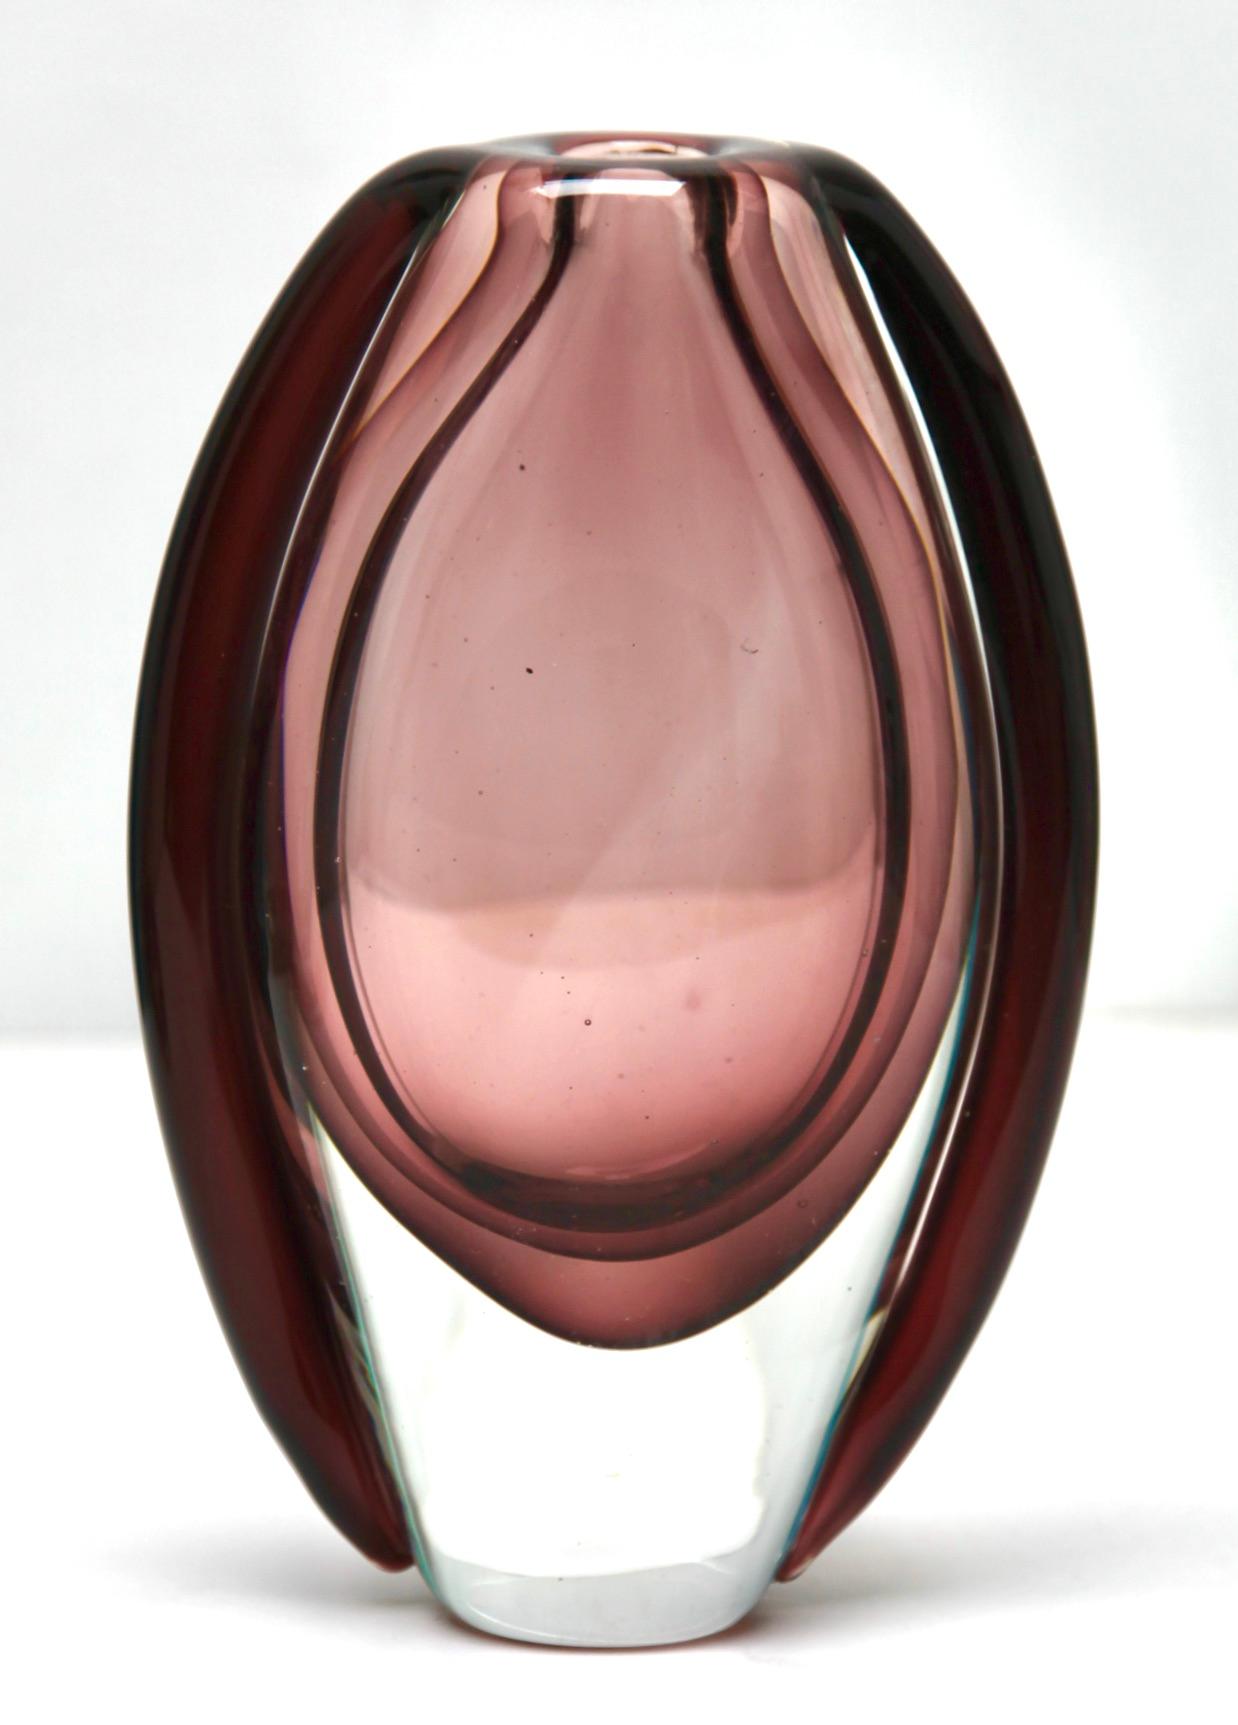 20th Century Murano Drop Vases Whit a Thick Sommerso 'Clear Glass Casing'